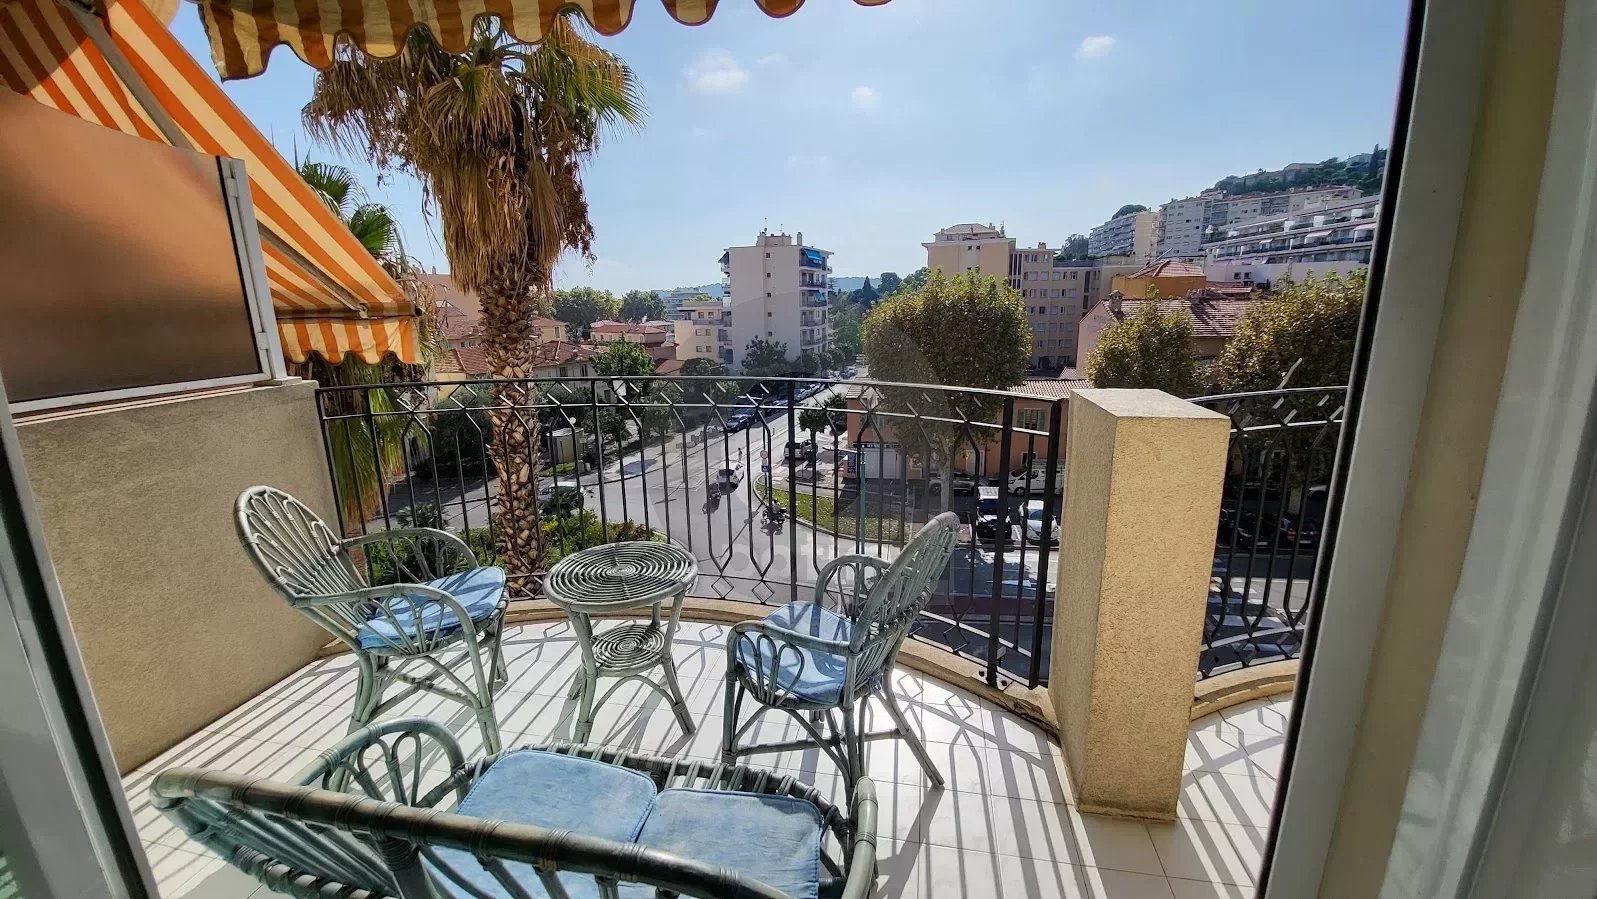 Menton - One bedroom apartment - terrace and garage